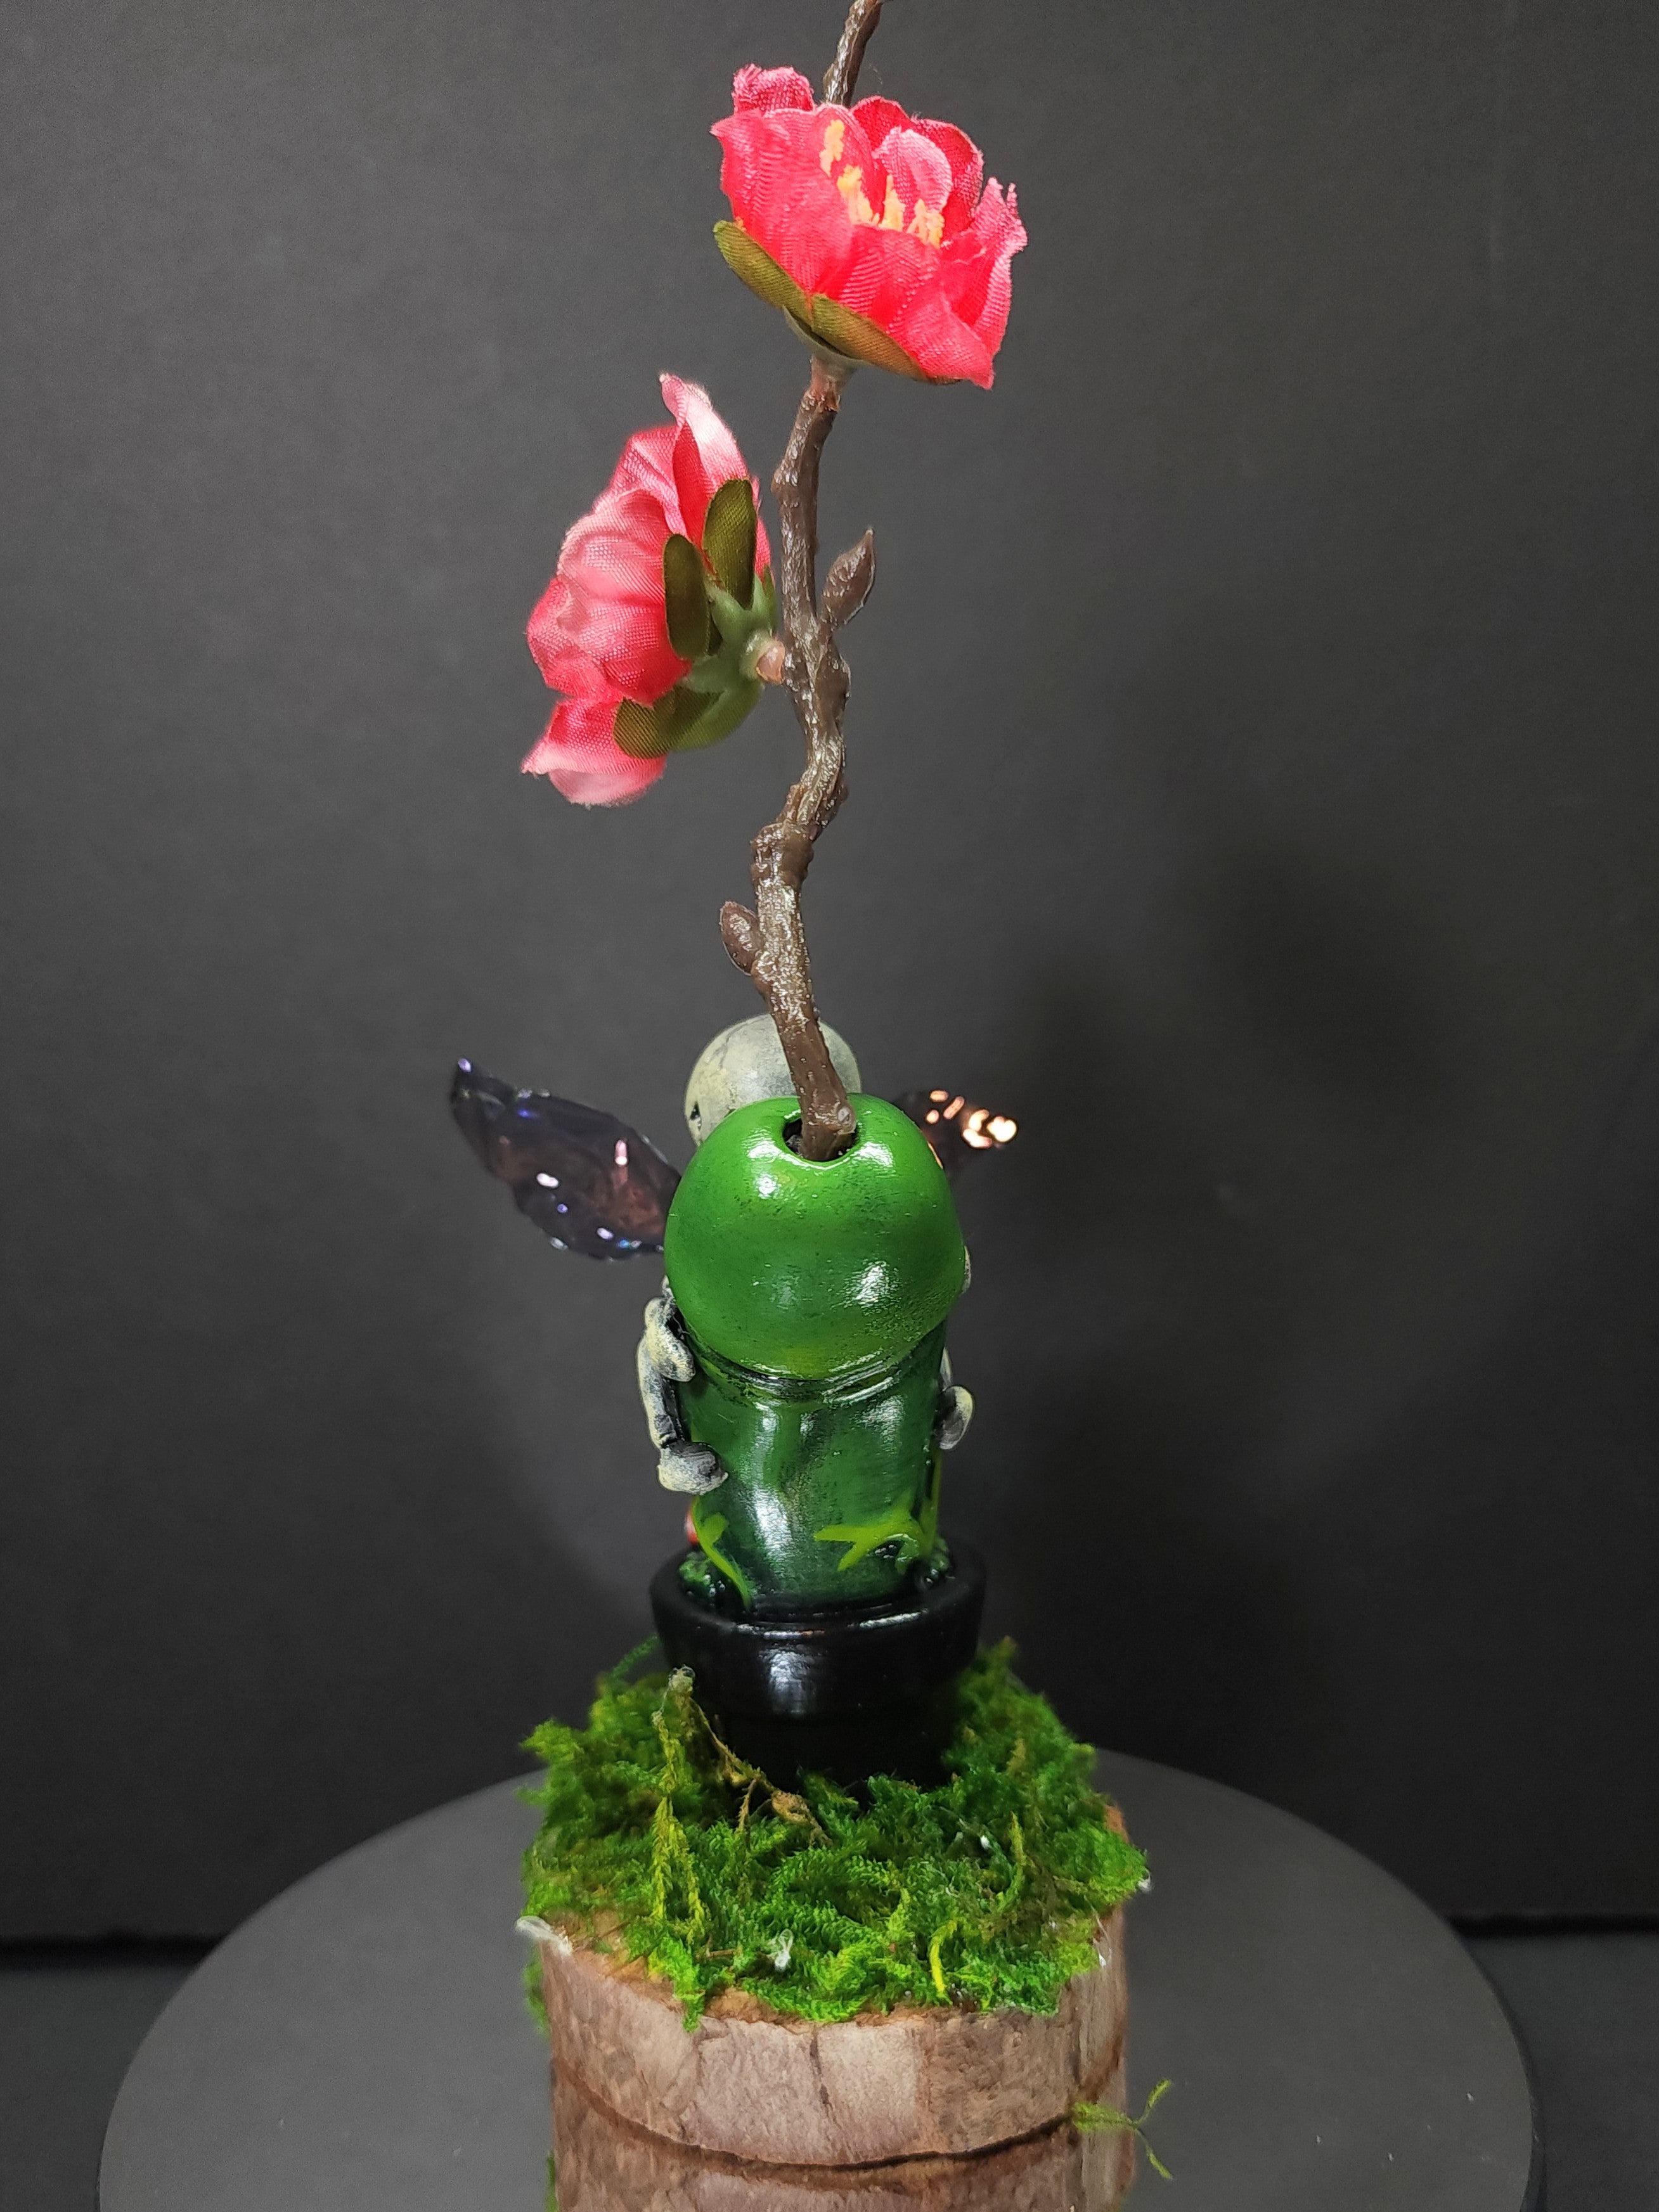 A close-up of a green plant with a red flower and a black object on a stump with moss.